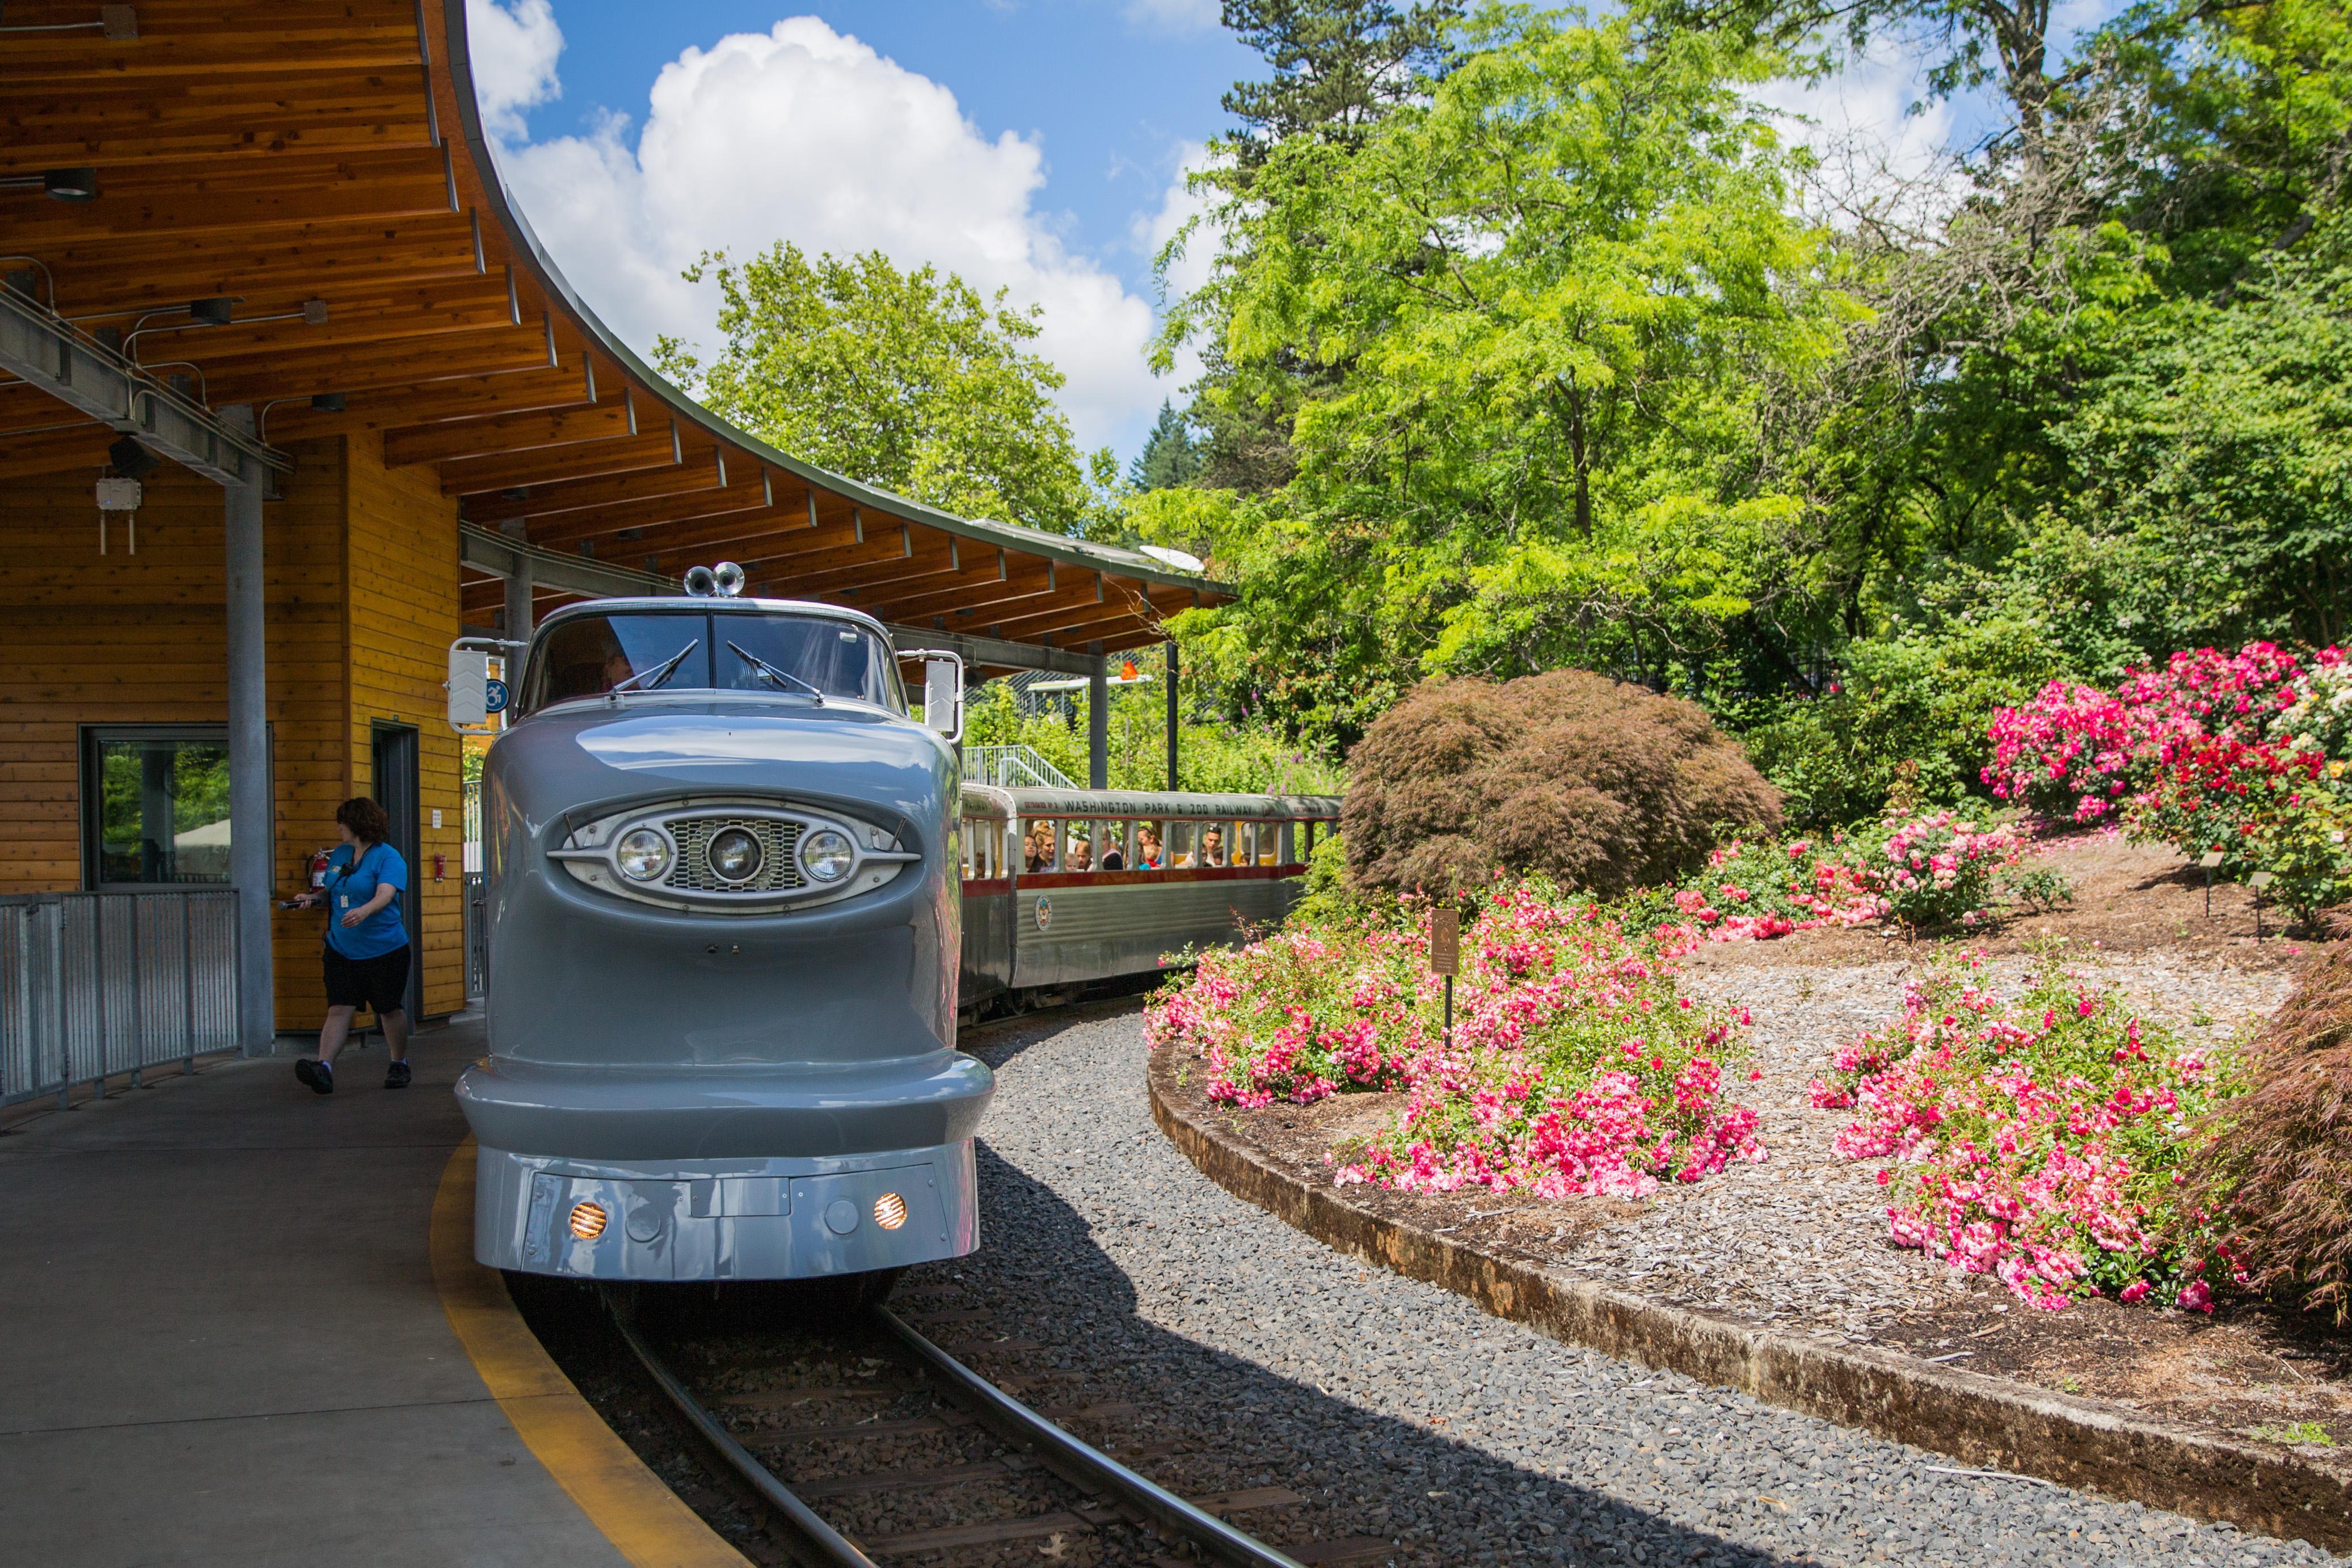 Washington Park and Zoo Railway is a star attraction for adults and children alike.